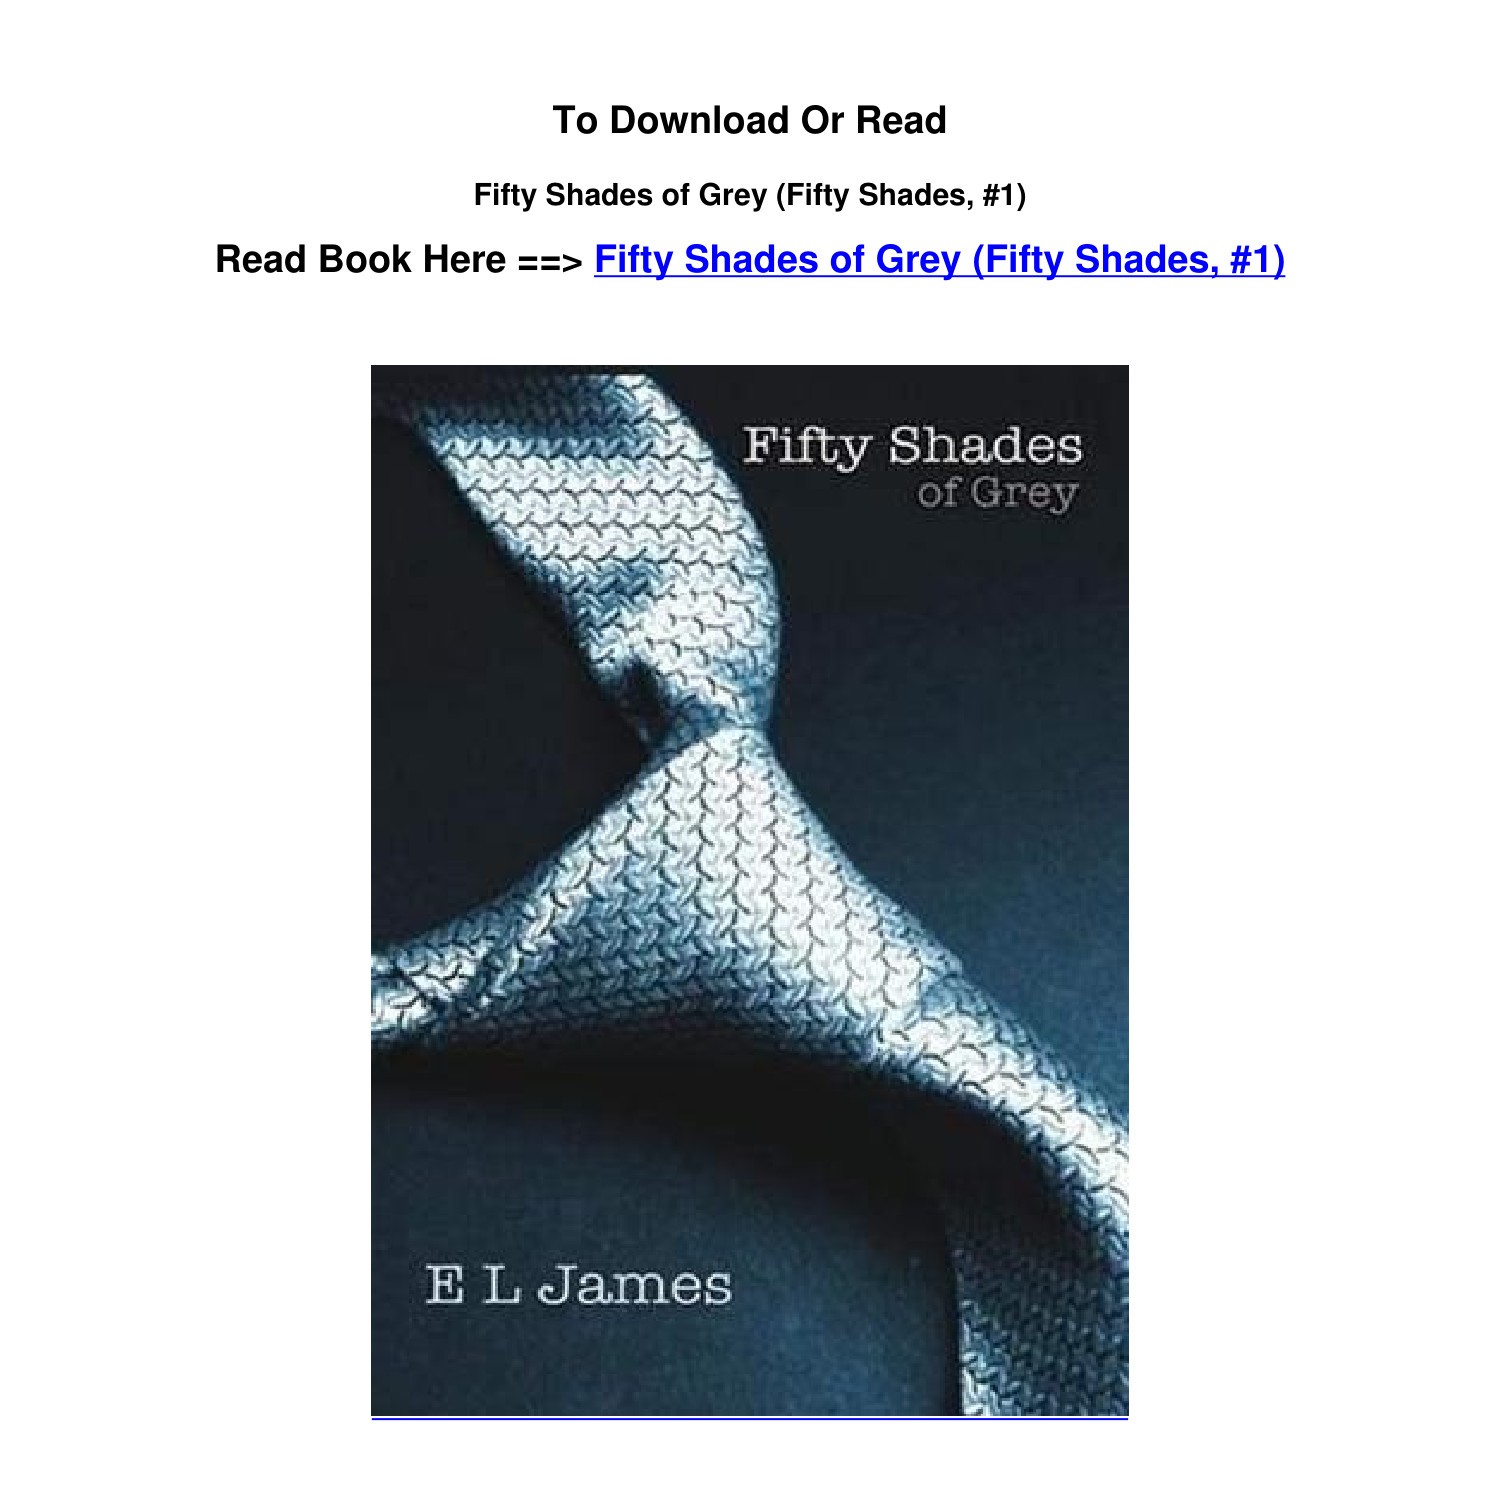 fifty shades of grey by e l james pdf